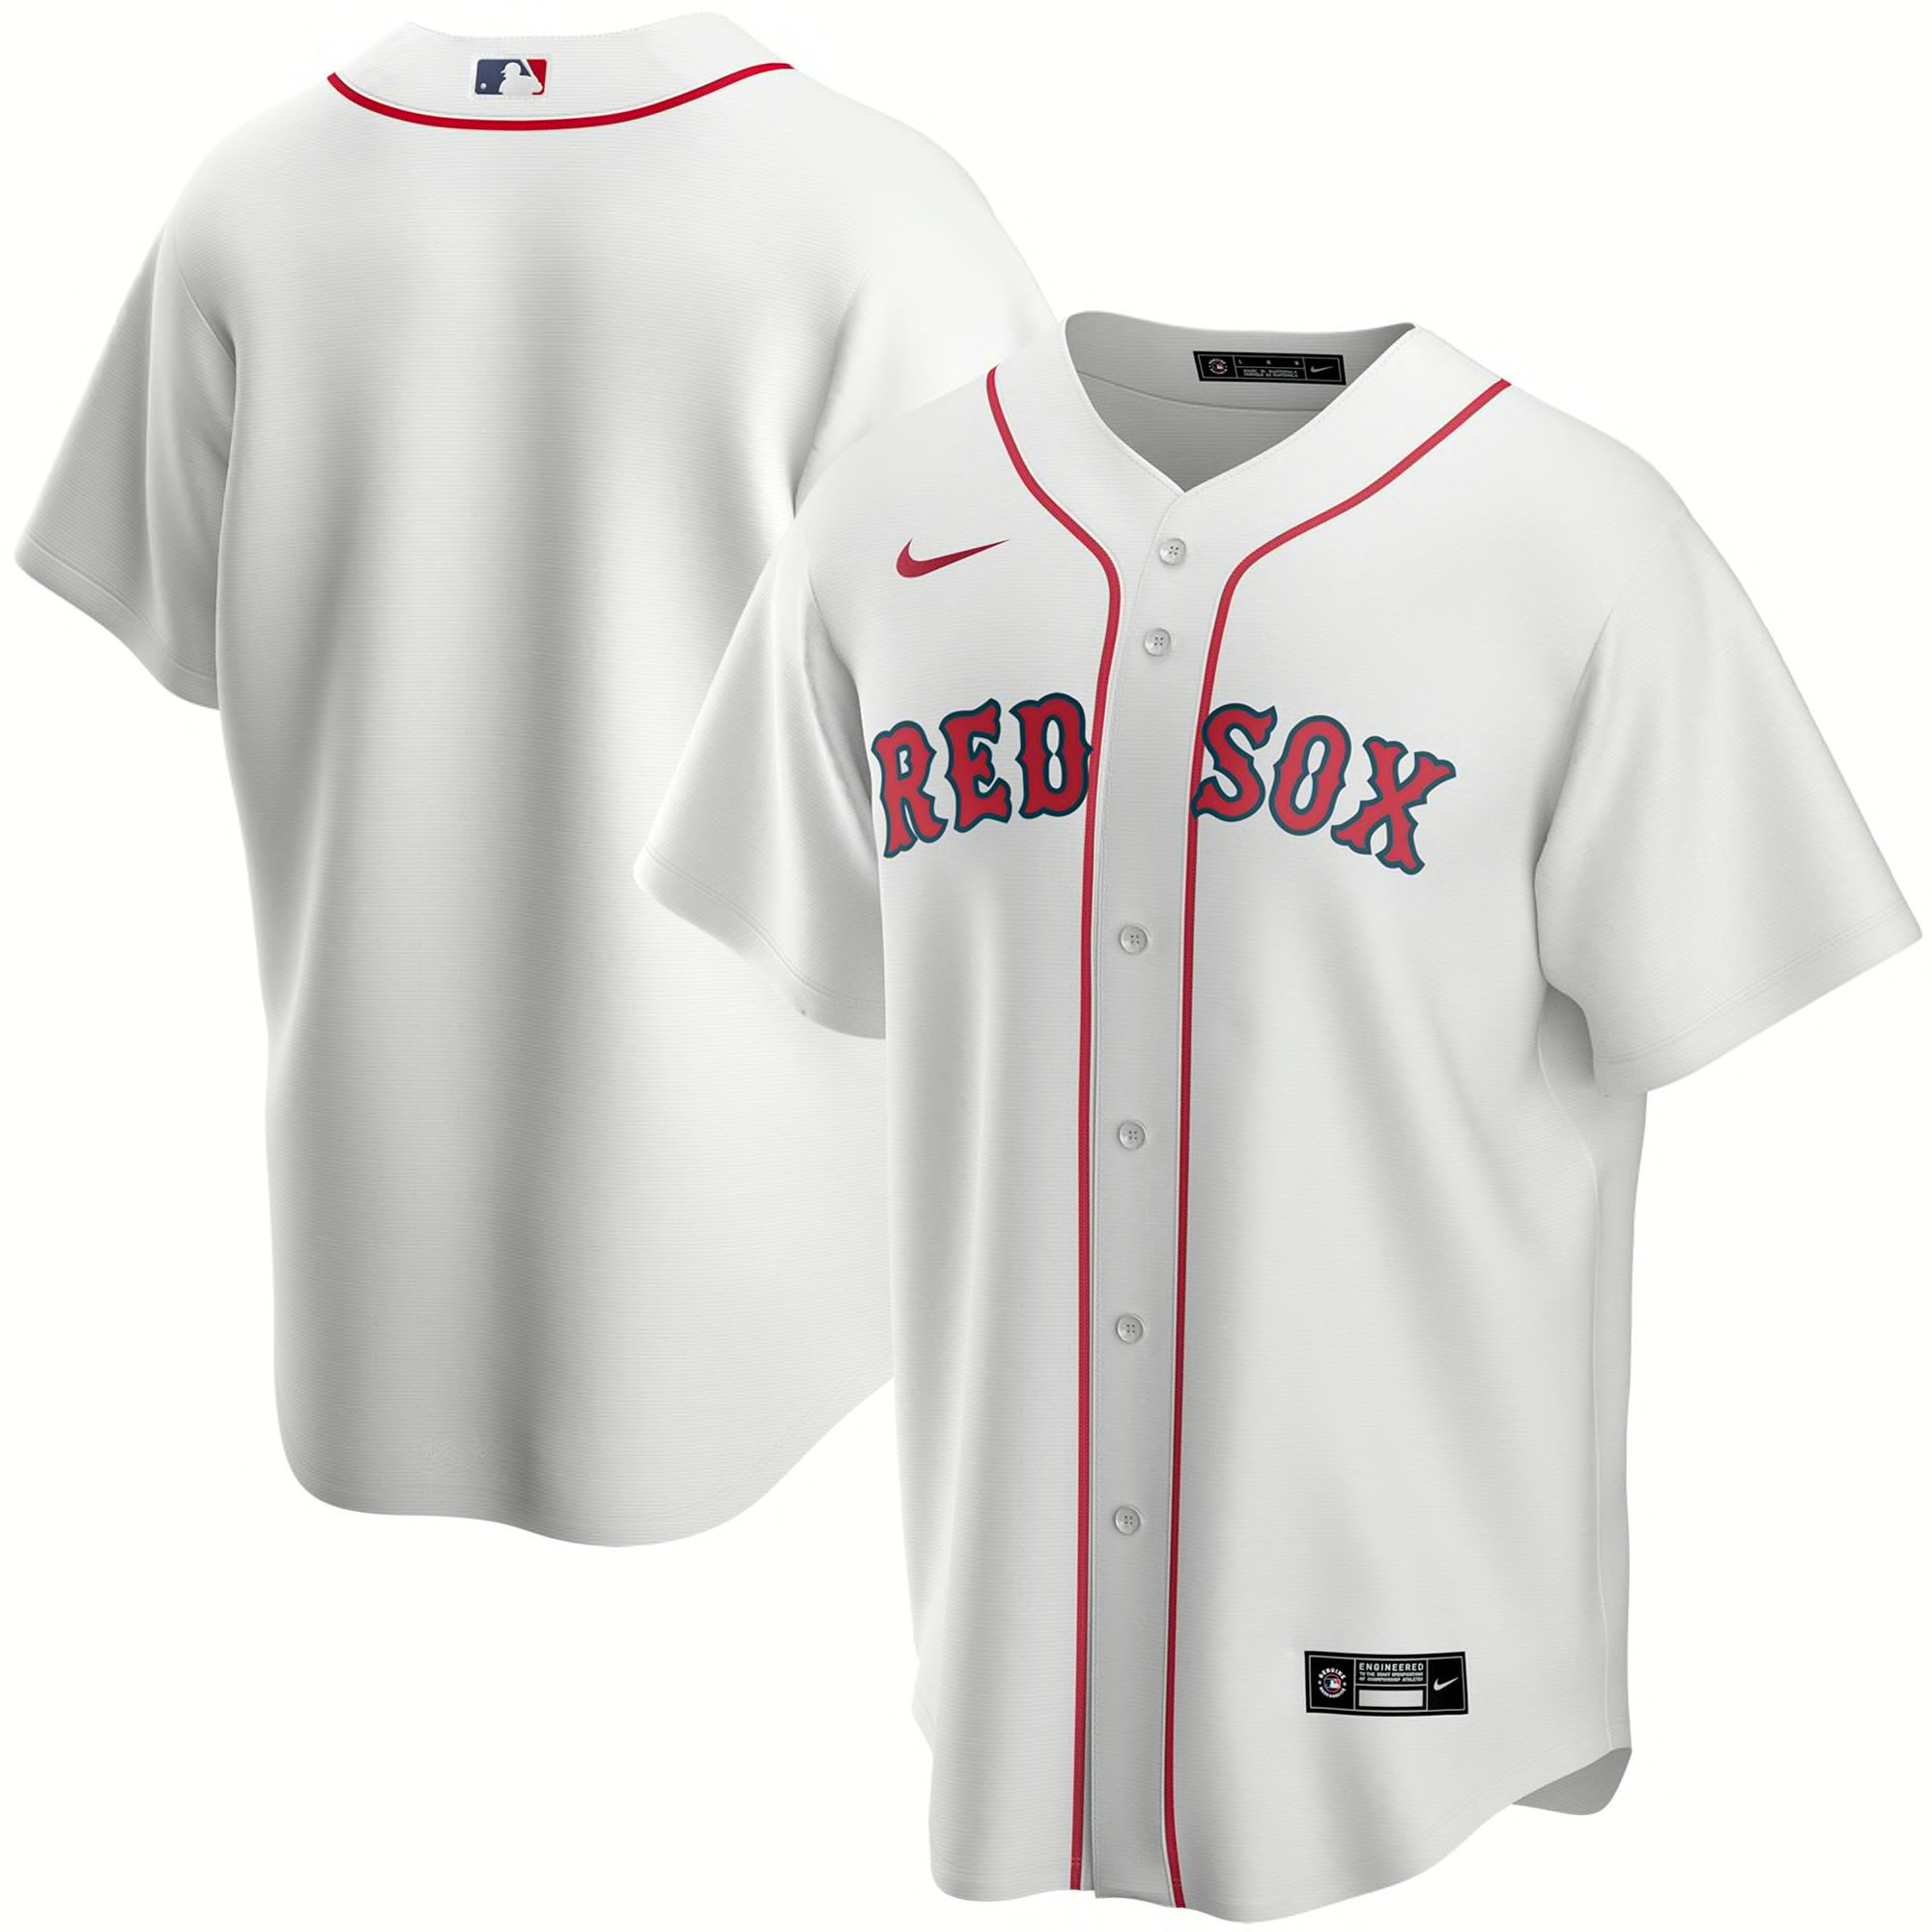 Father's Day gifts for the Boston Red Sox fan